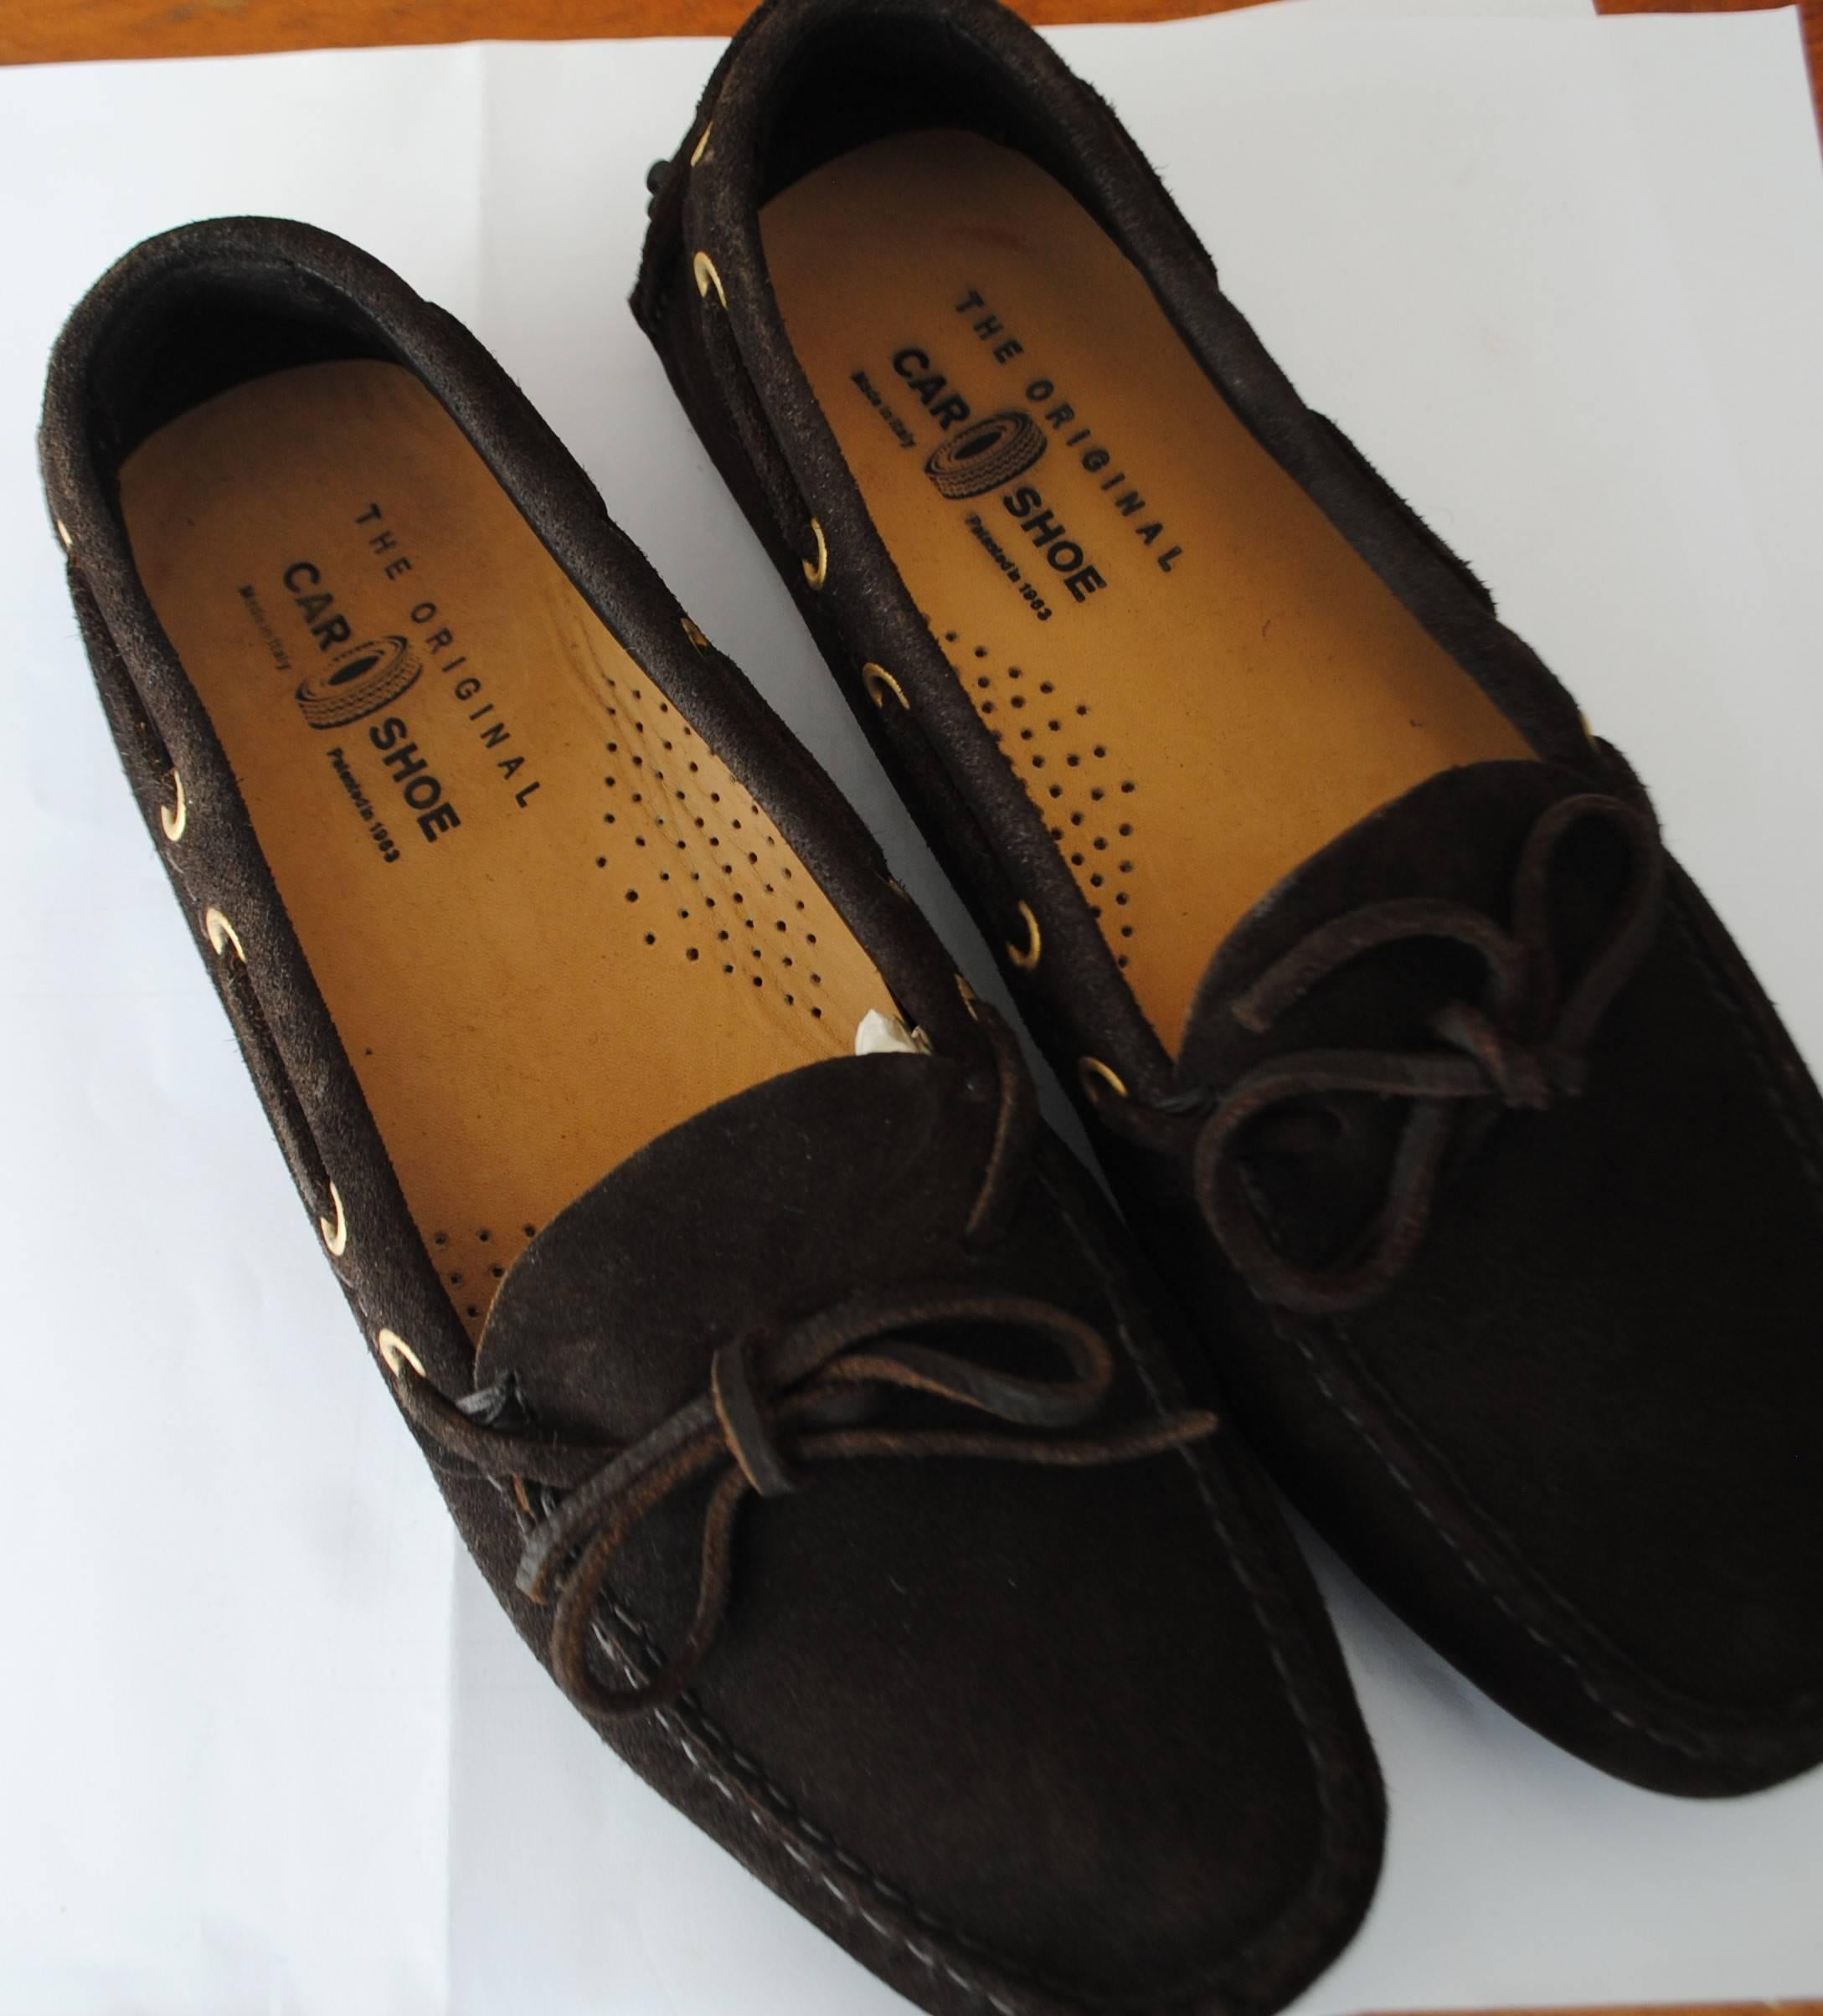 Car Shoe Brown loafer Unworn
totally made in italy in italian size range 38